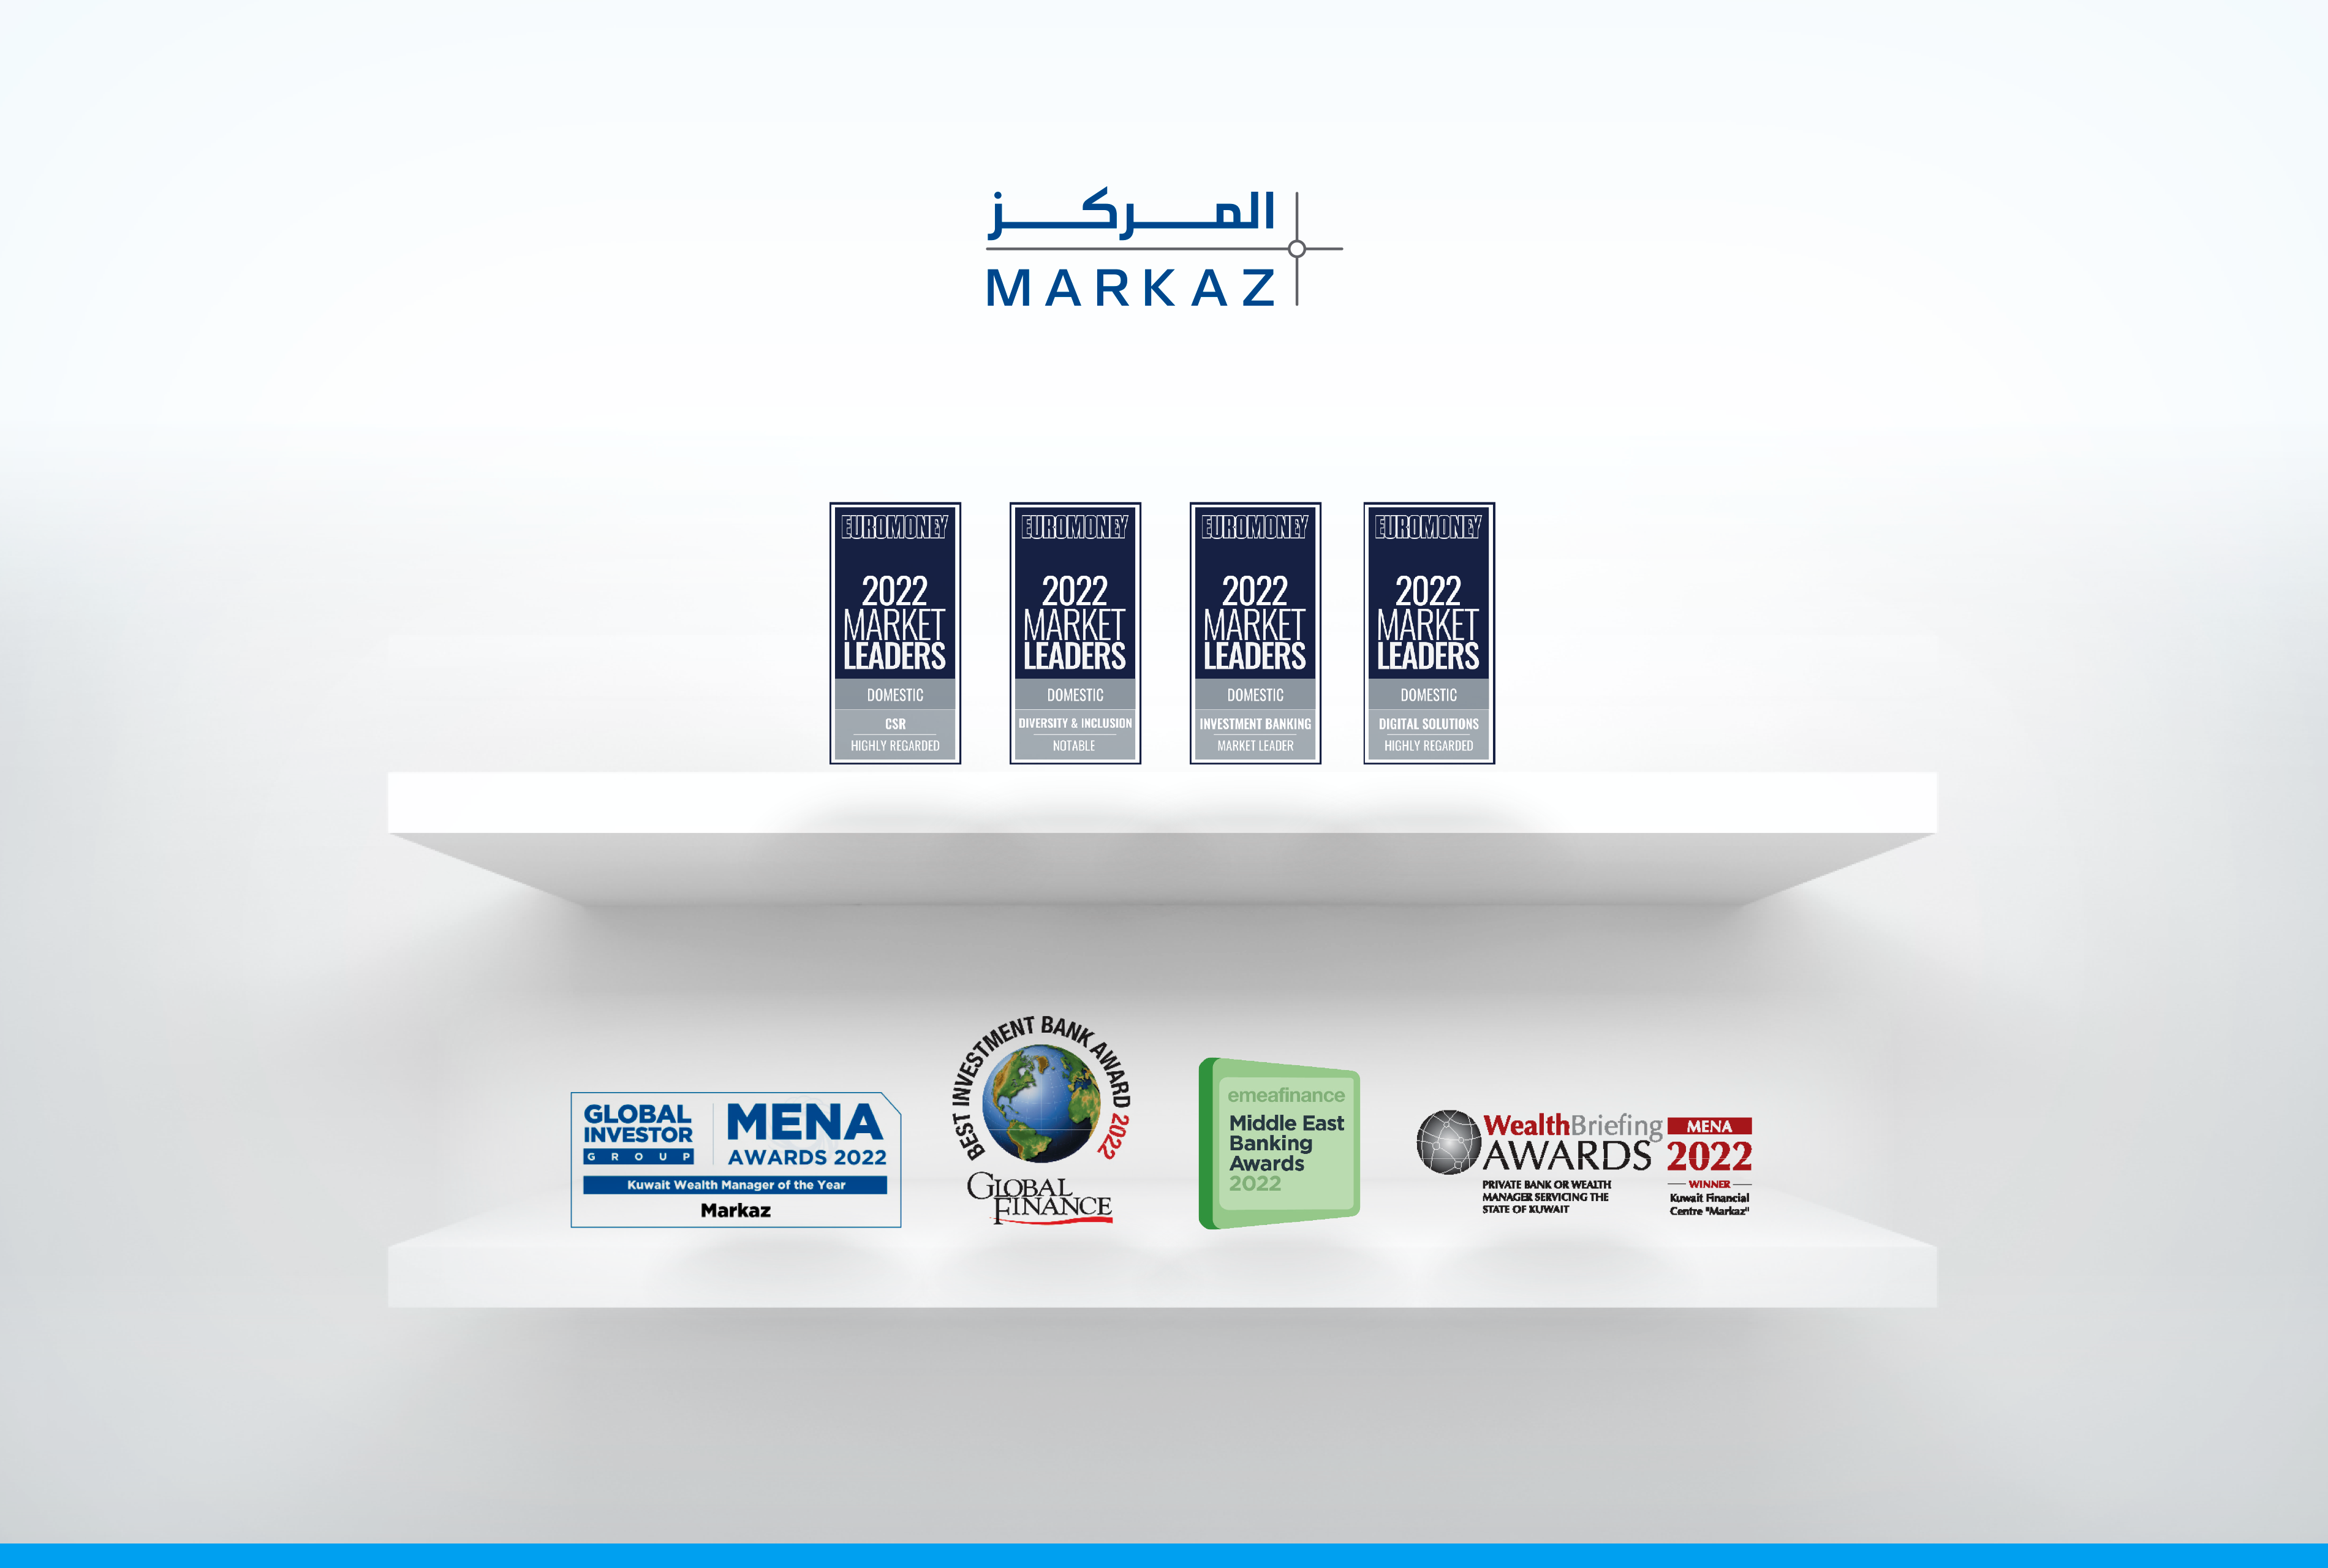 Markaz concludes 2022 strong with 9 prestigious awards recognizing its excellence